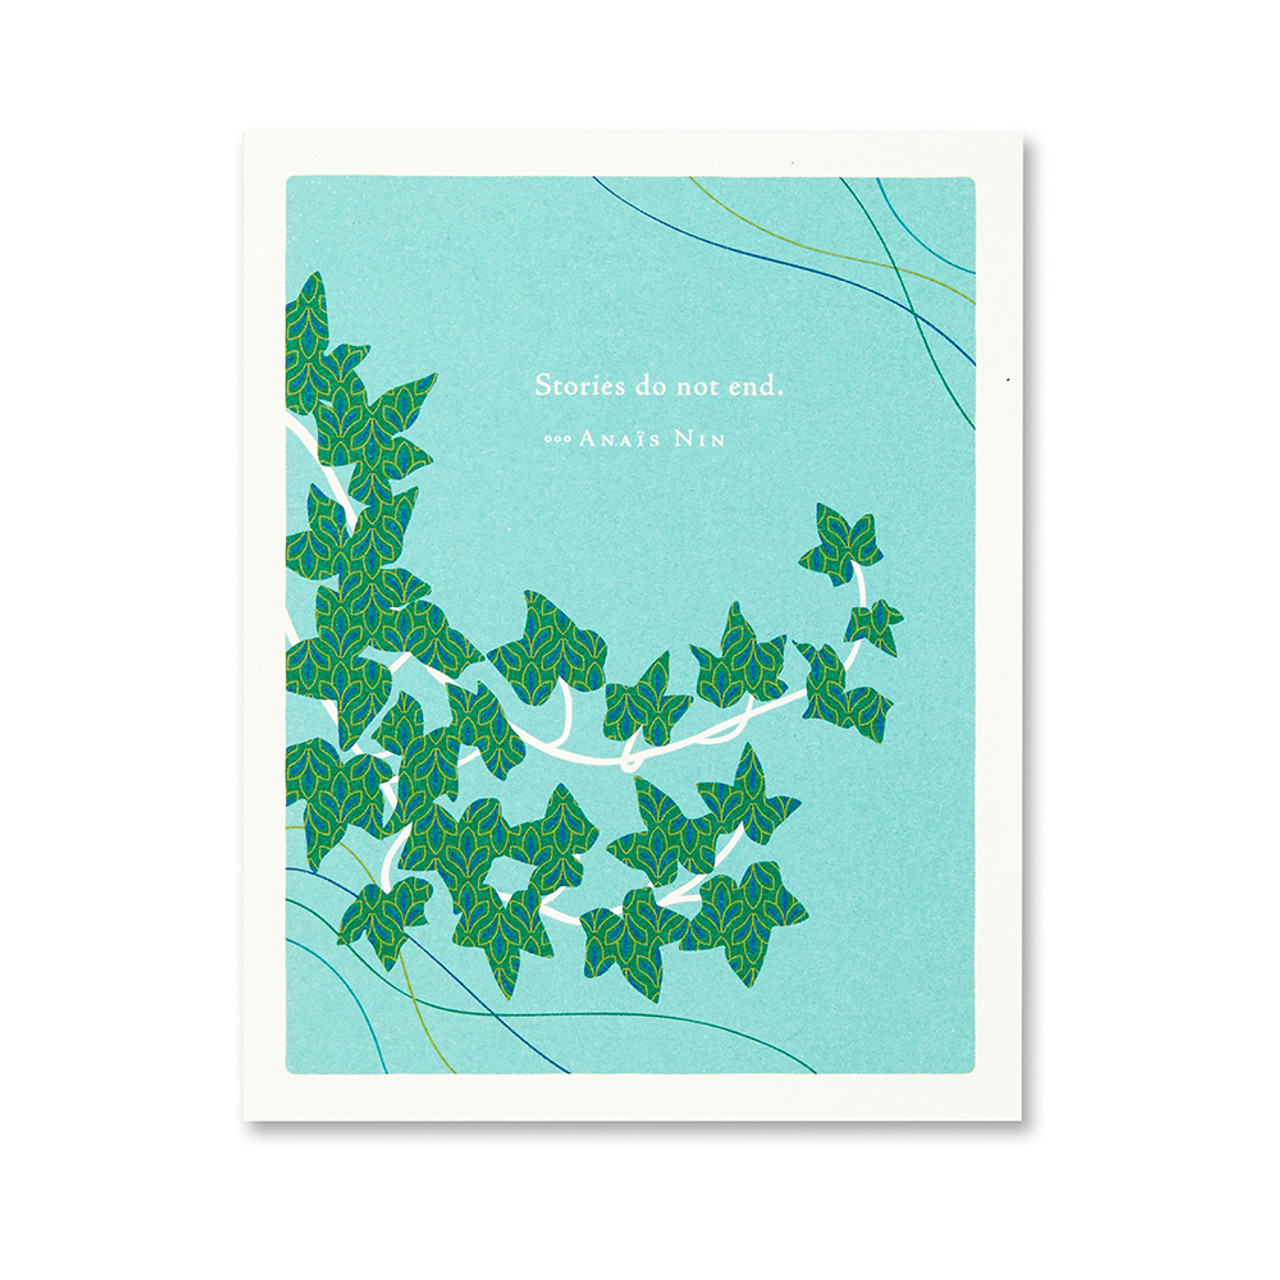 Positively Green Sympathy Greeting Card - “Stories do not end." - ANAÏS NIN - Mellow Monkey